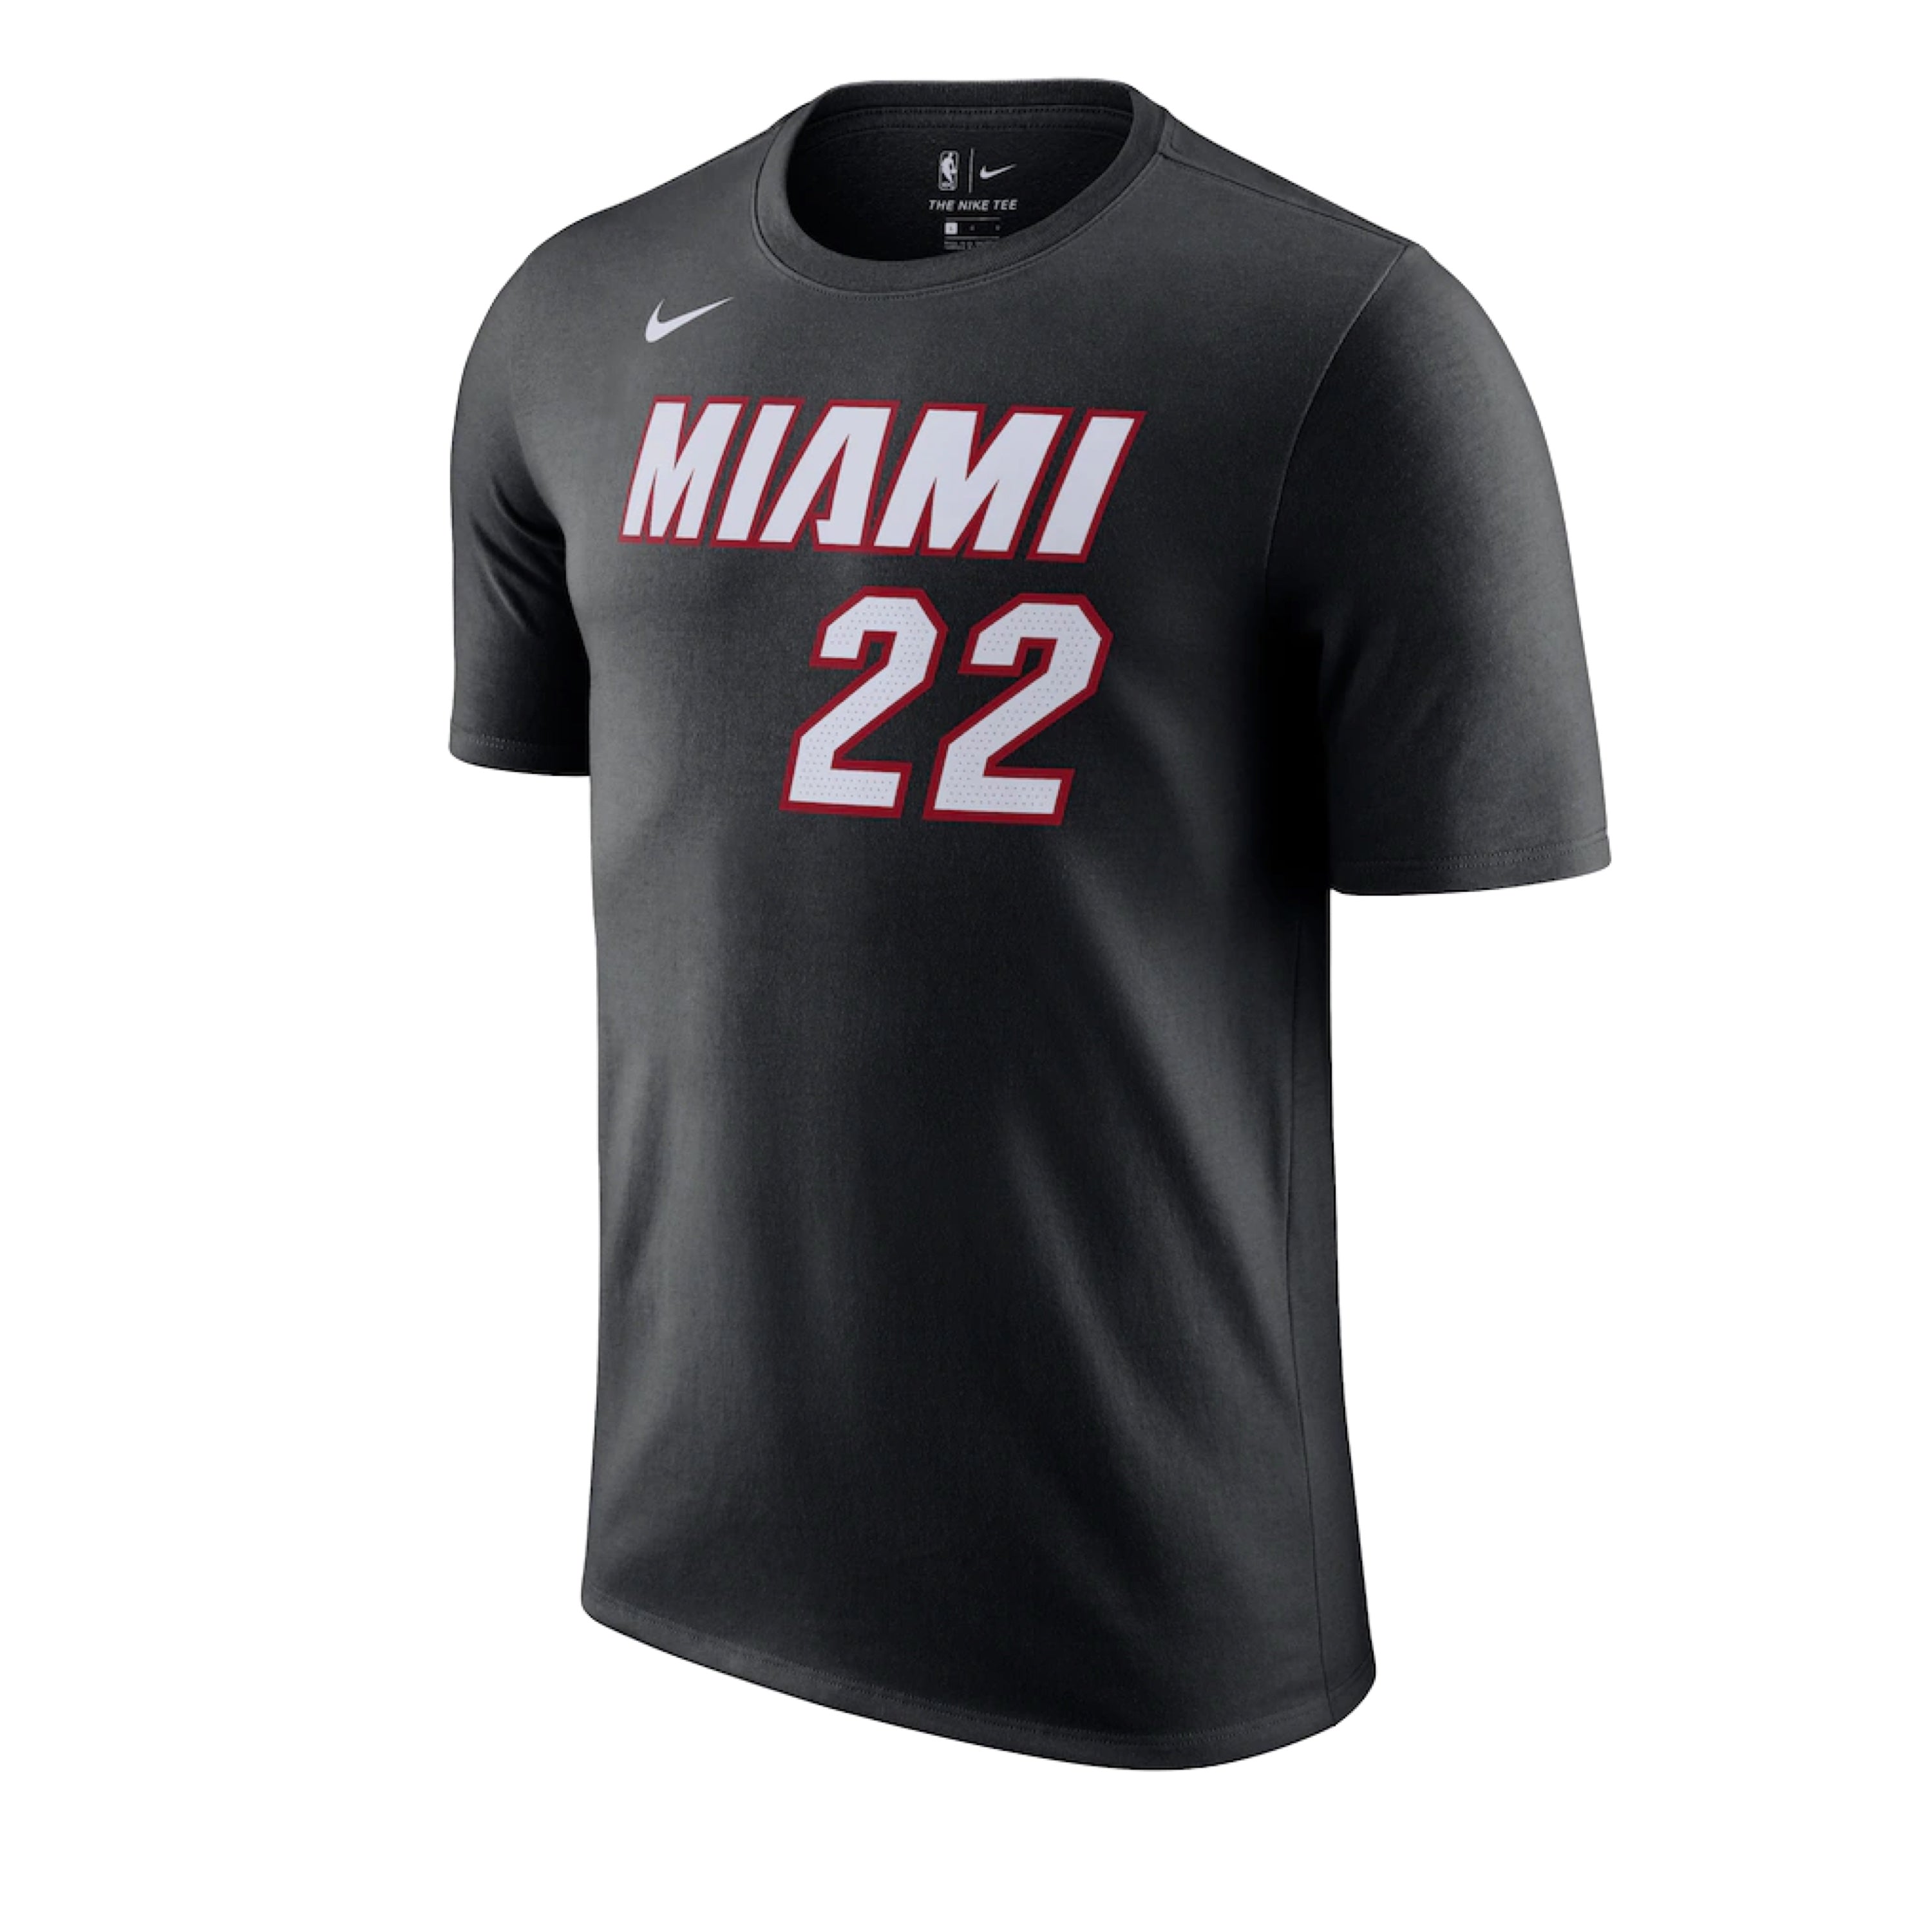 Jimmy Butler Name and Number - Jimmy Butler - Kids T-Shirt